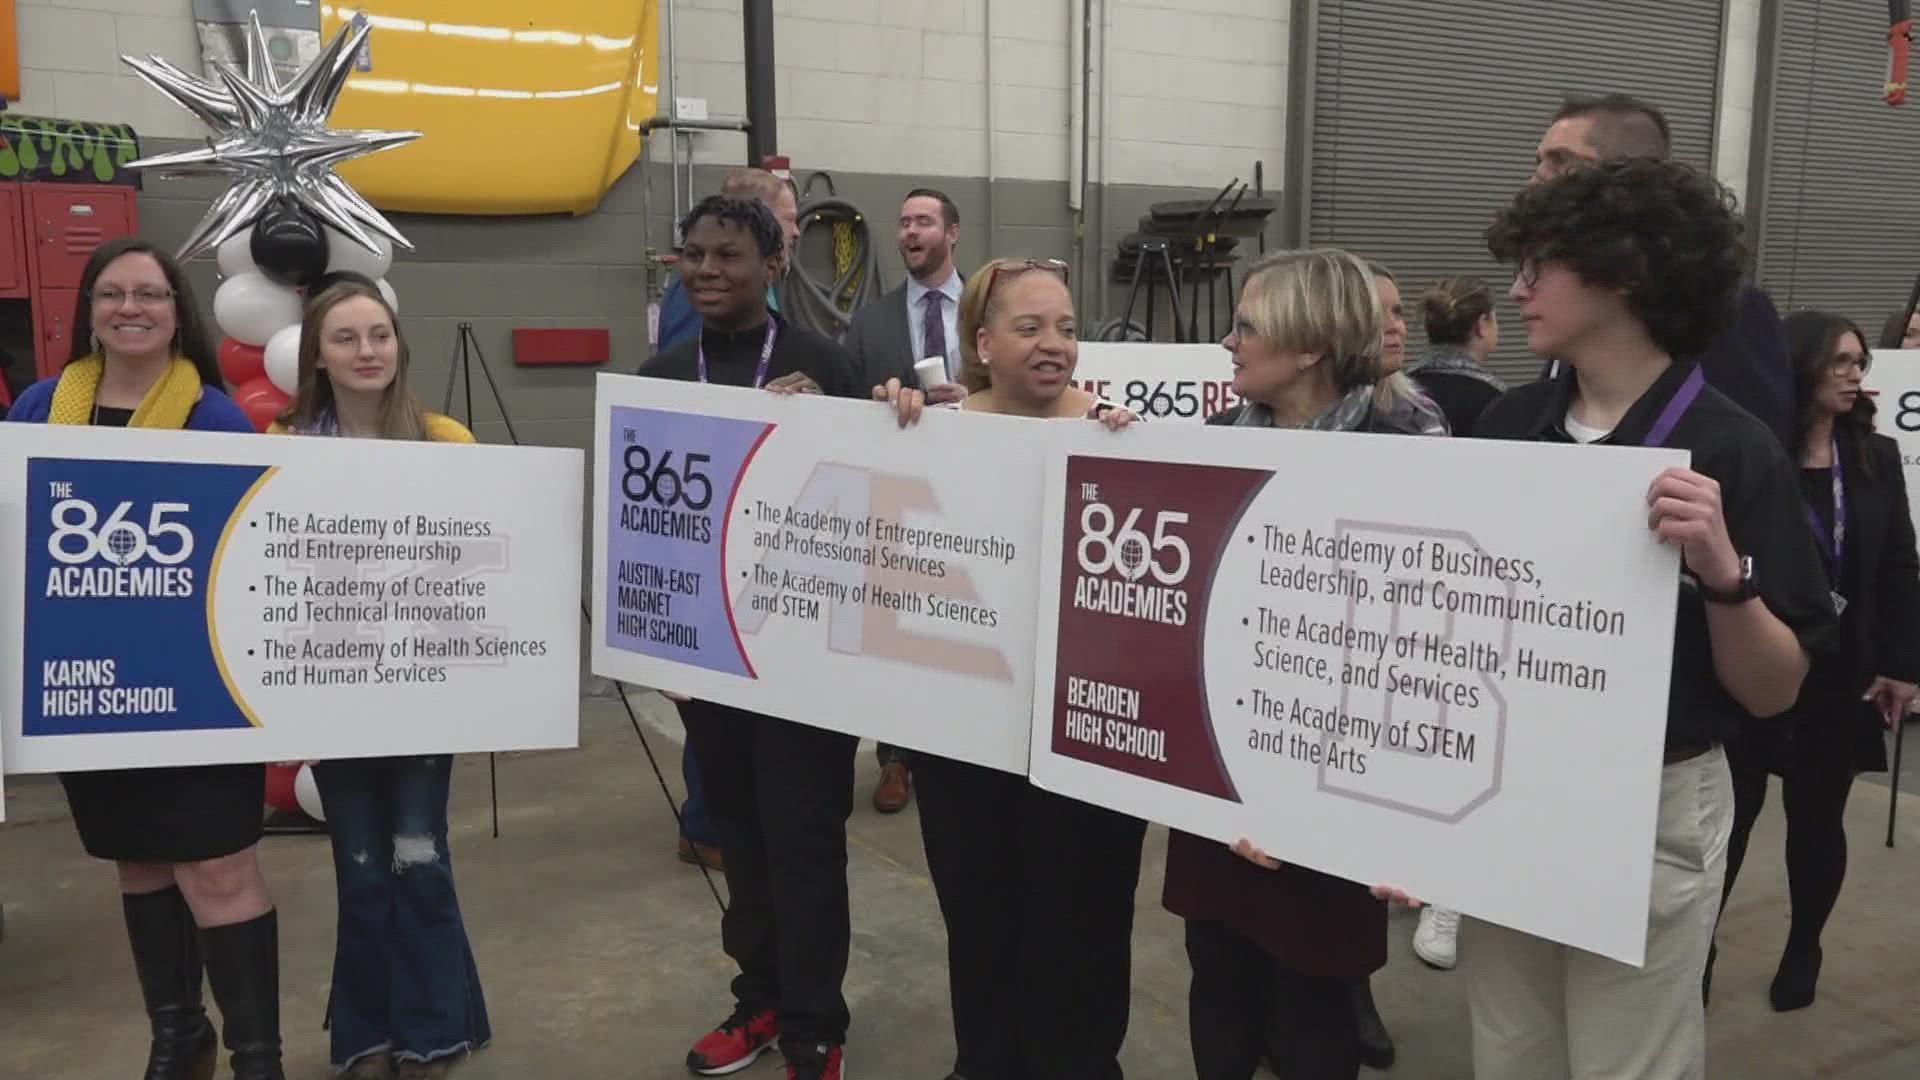 "The 865 Academies" initiative will allow students to experience work-based learning, opportunities for job shadowing and guidance from professionals.